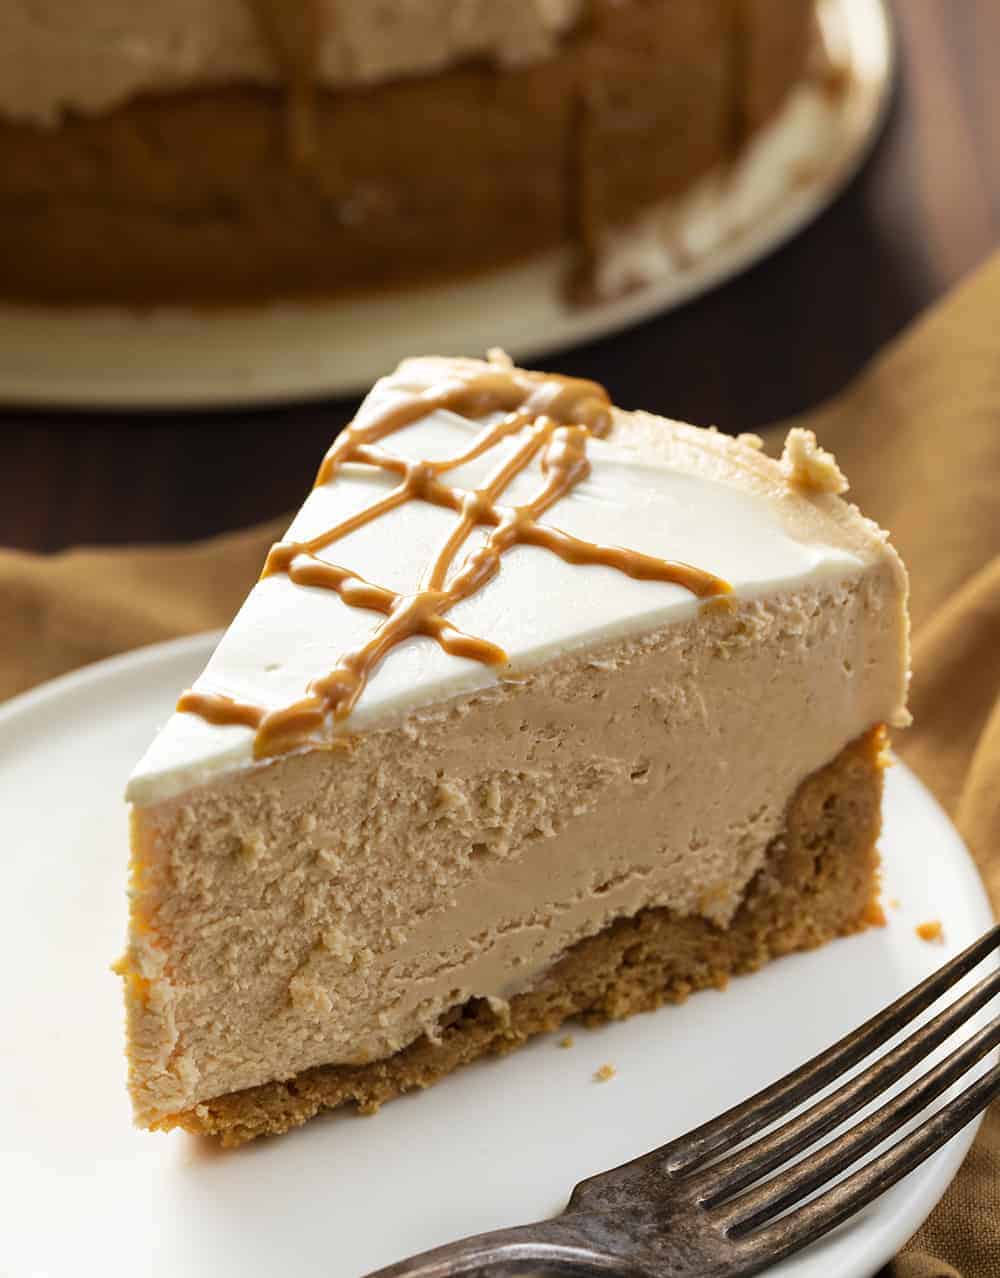 Slice of Peanut Butter Cheesecake